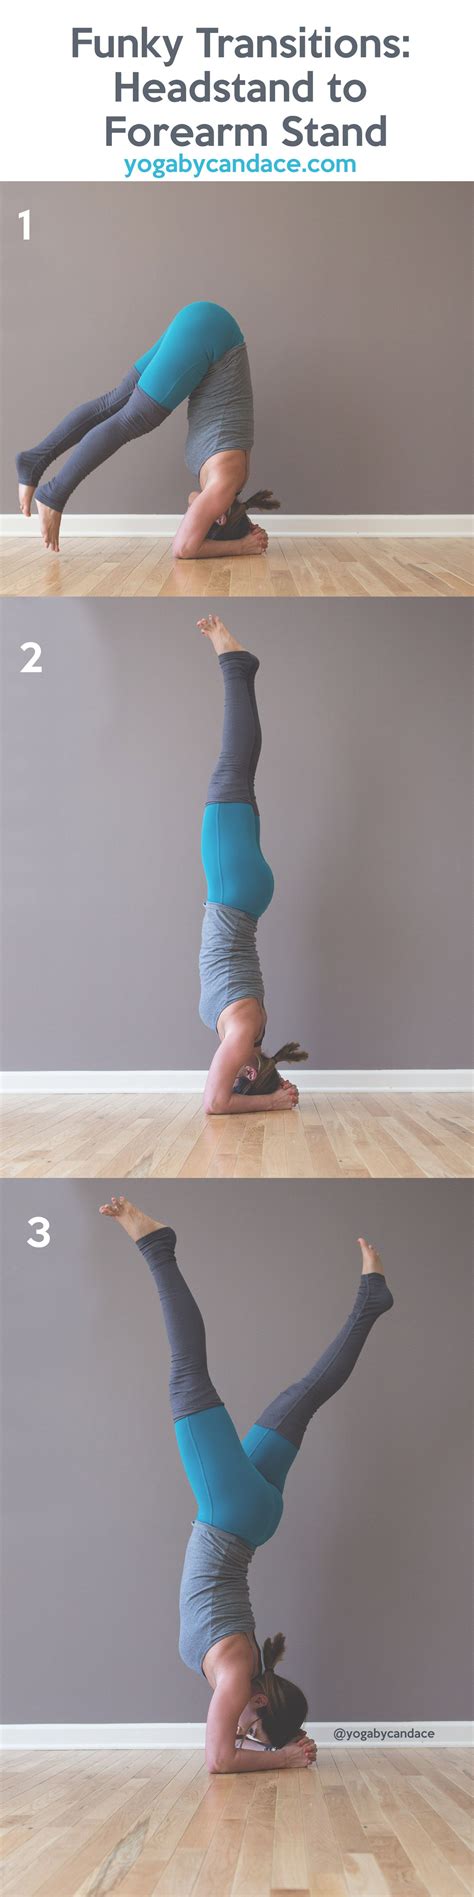 Funky Transitions Headstand To Forearm Stand — Yogabycandace Yoga